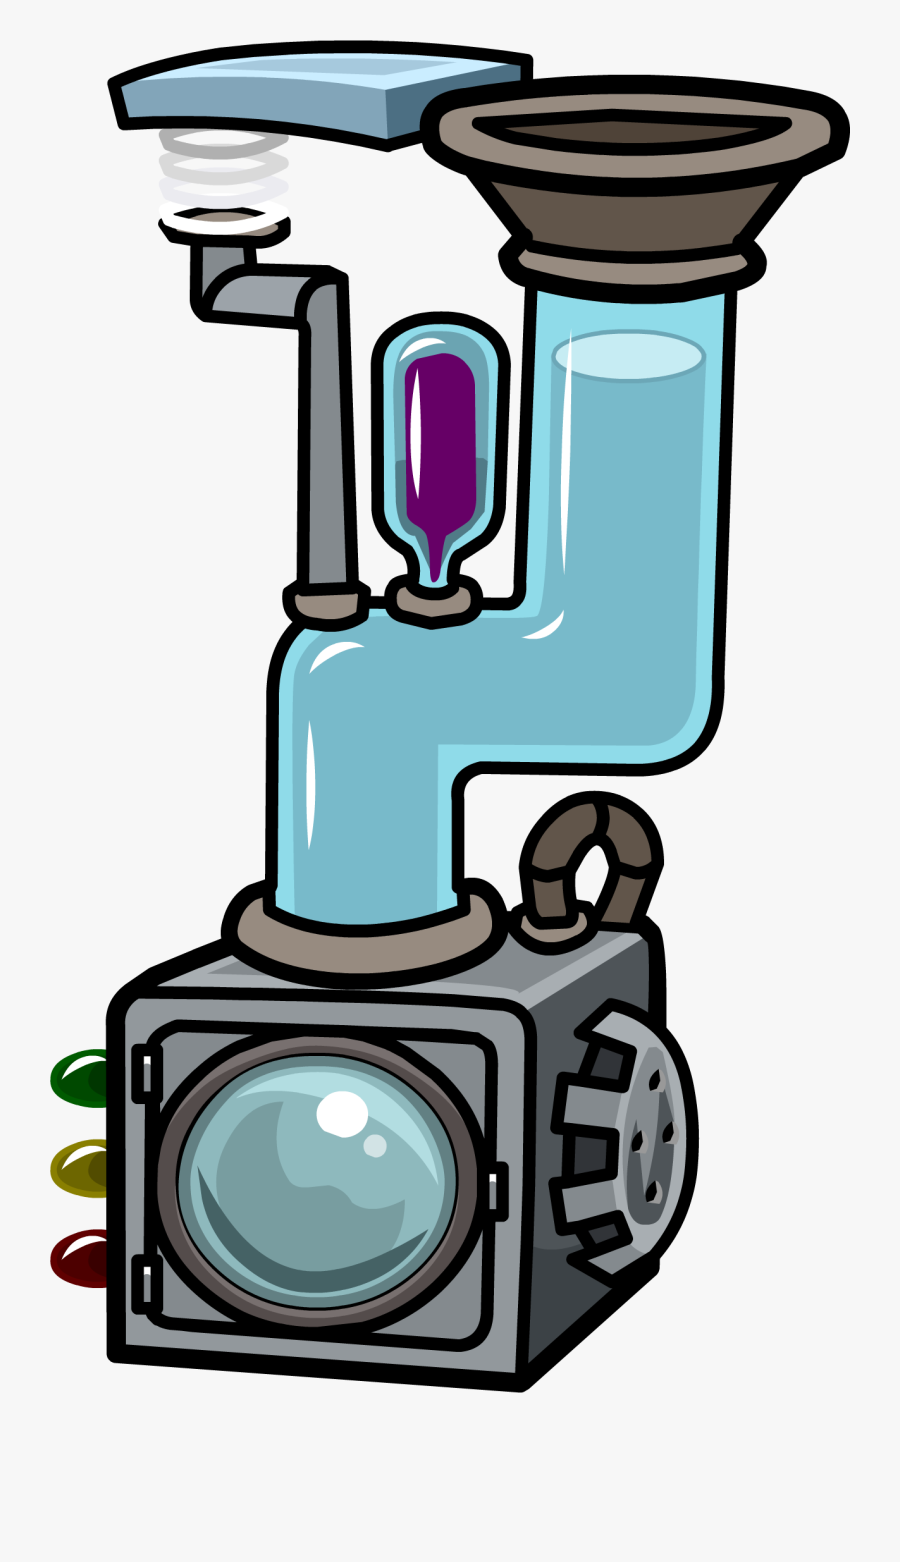 Washing Machine Club Penguin Clipart , Png Download - Club Penguin Puffle Washer, Transparent Clipart